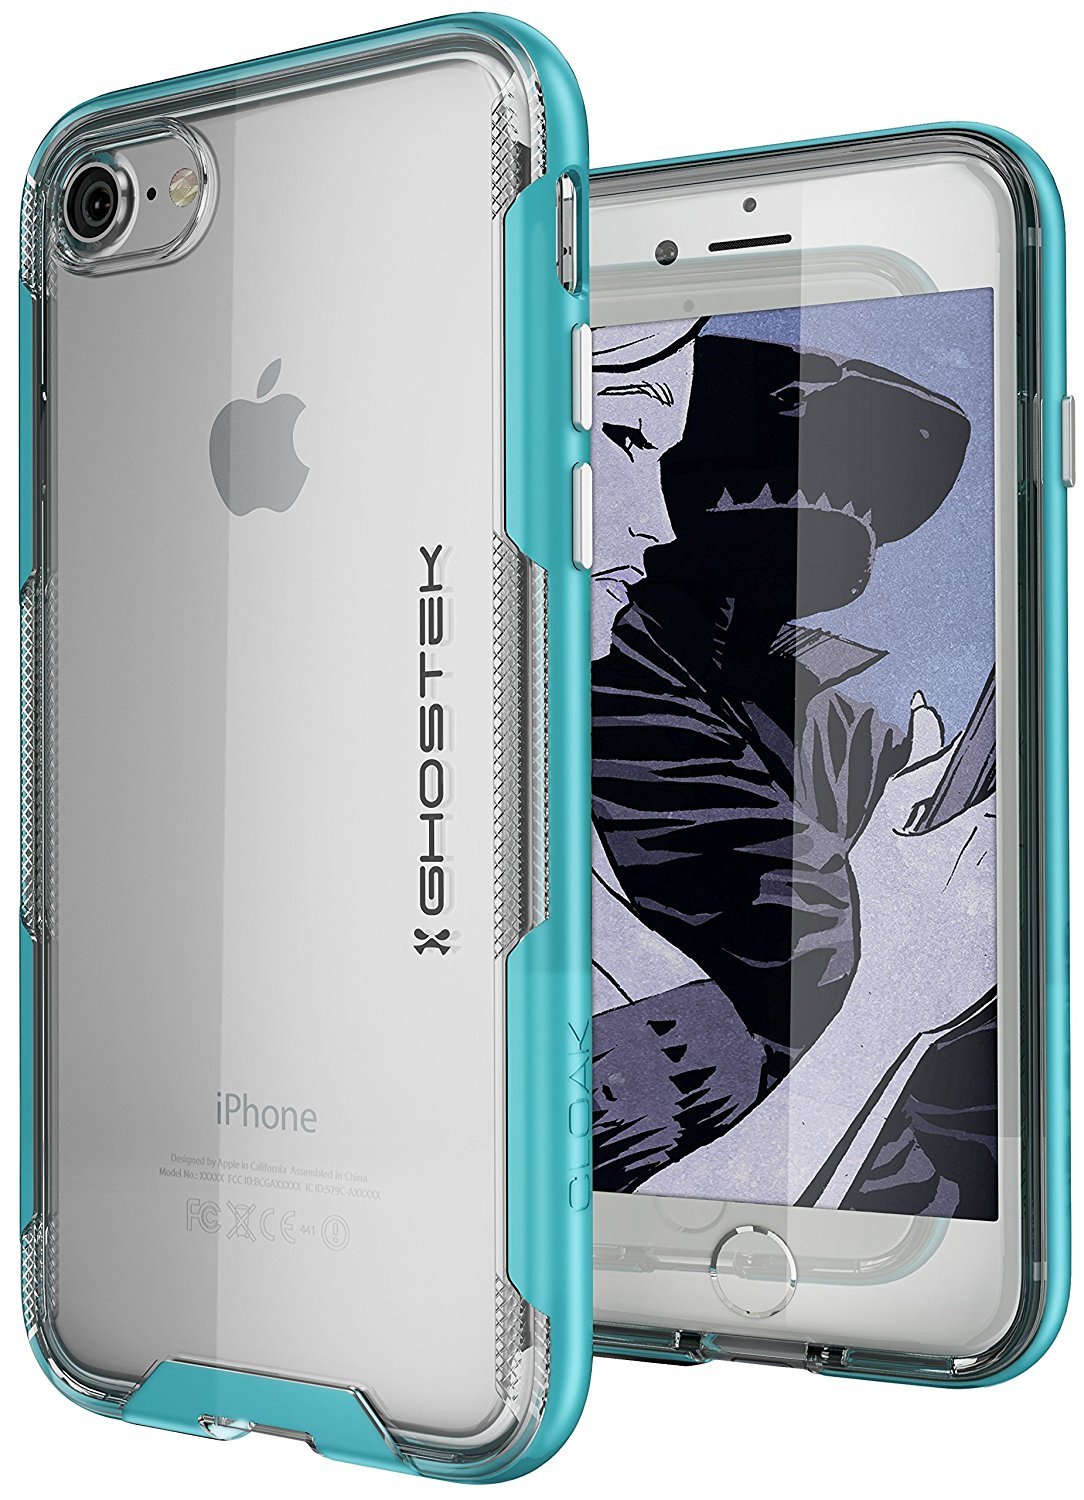 iPhone 7 Case, Ghostek Cloak 3 Series Case for iPhone 7 Case Clear Protective Case [TEAL]